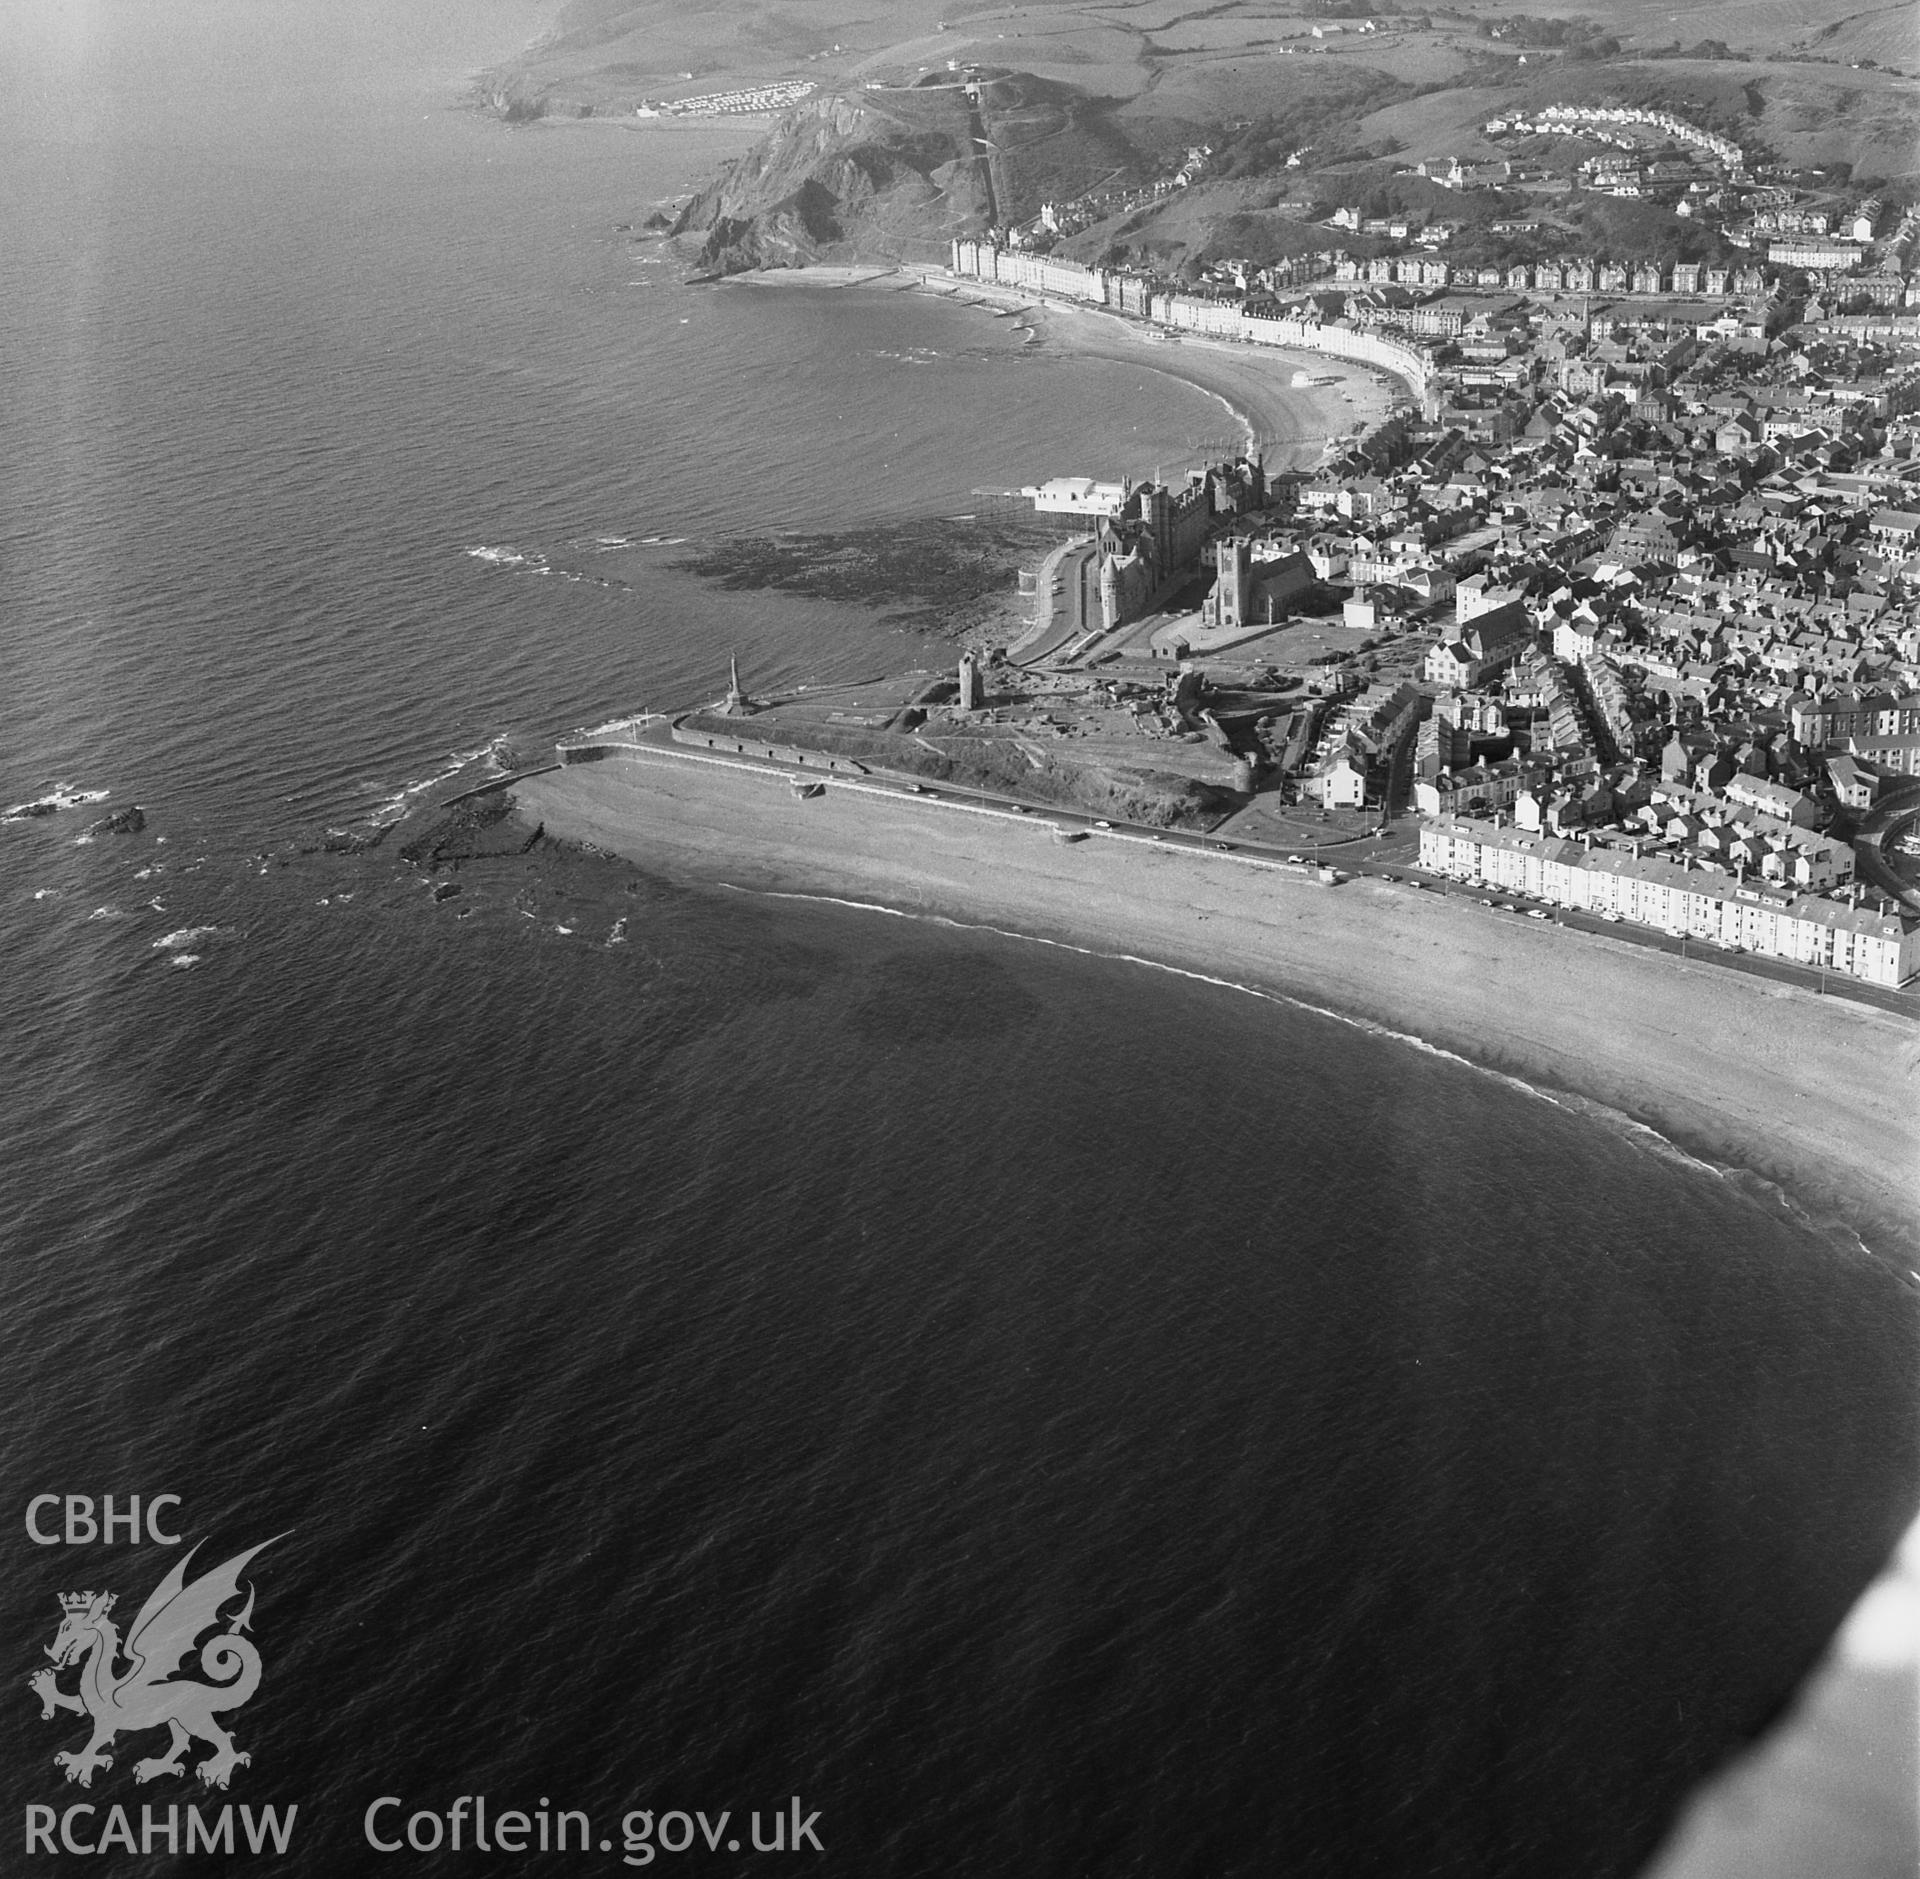 RCAHMW Black and white oblique aerial photograph of Aberystwyth Castle, taken by CR Musson on 24/06/88